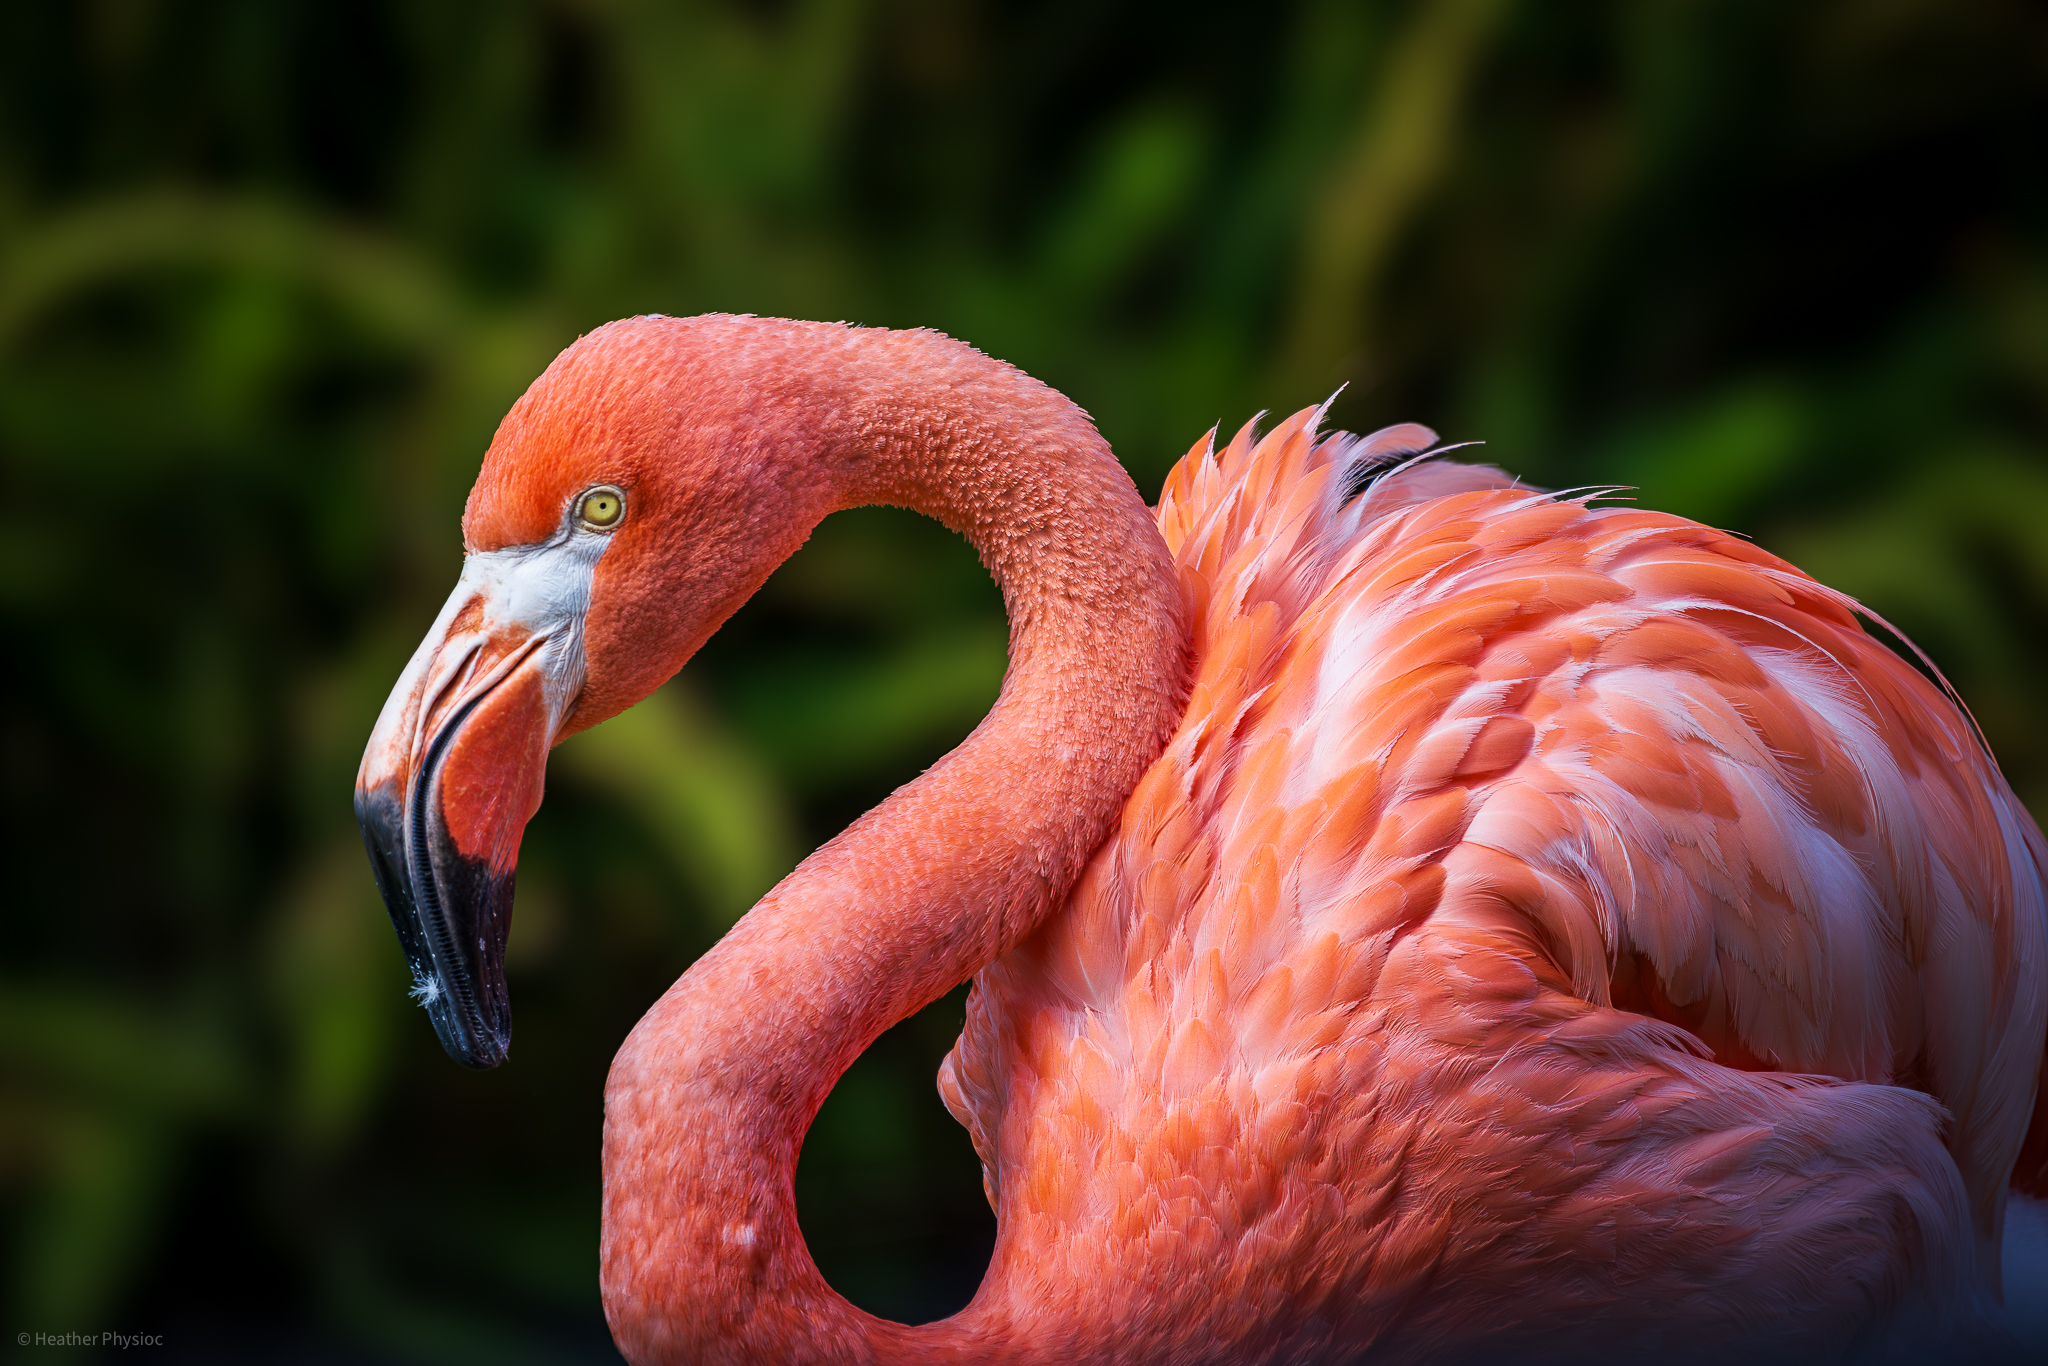 Perfect profile portrait of a pink flamingo at the Kansas City Zoo